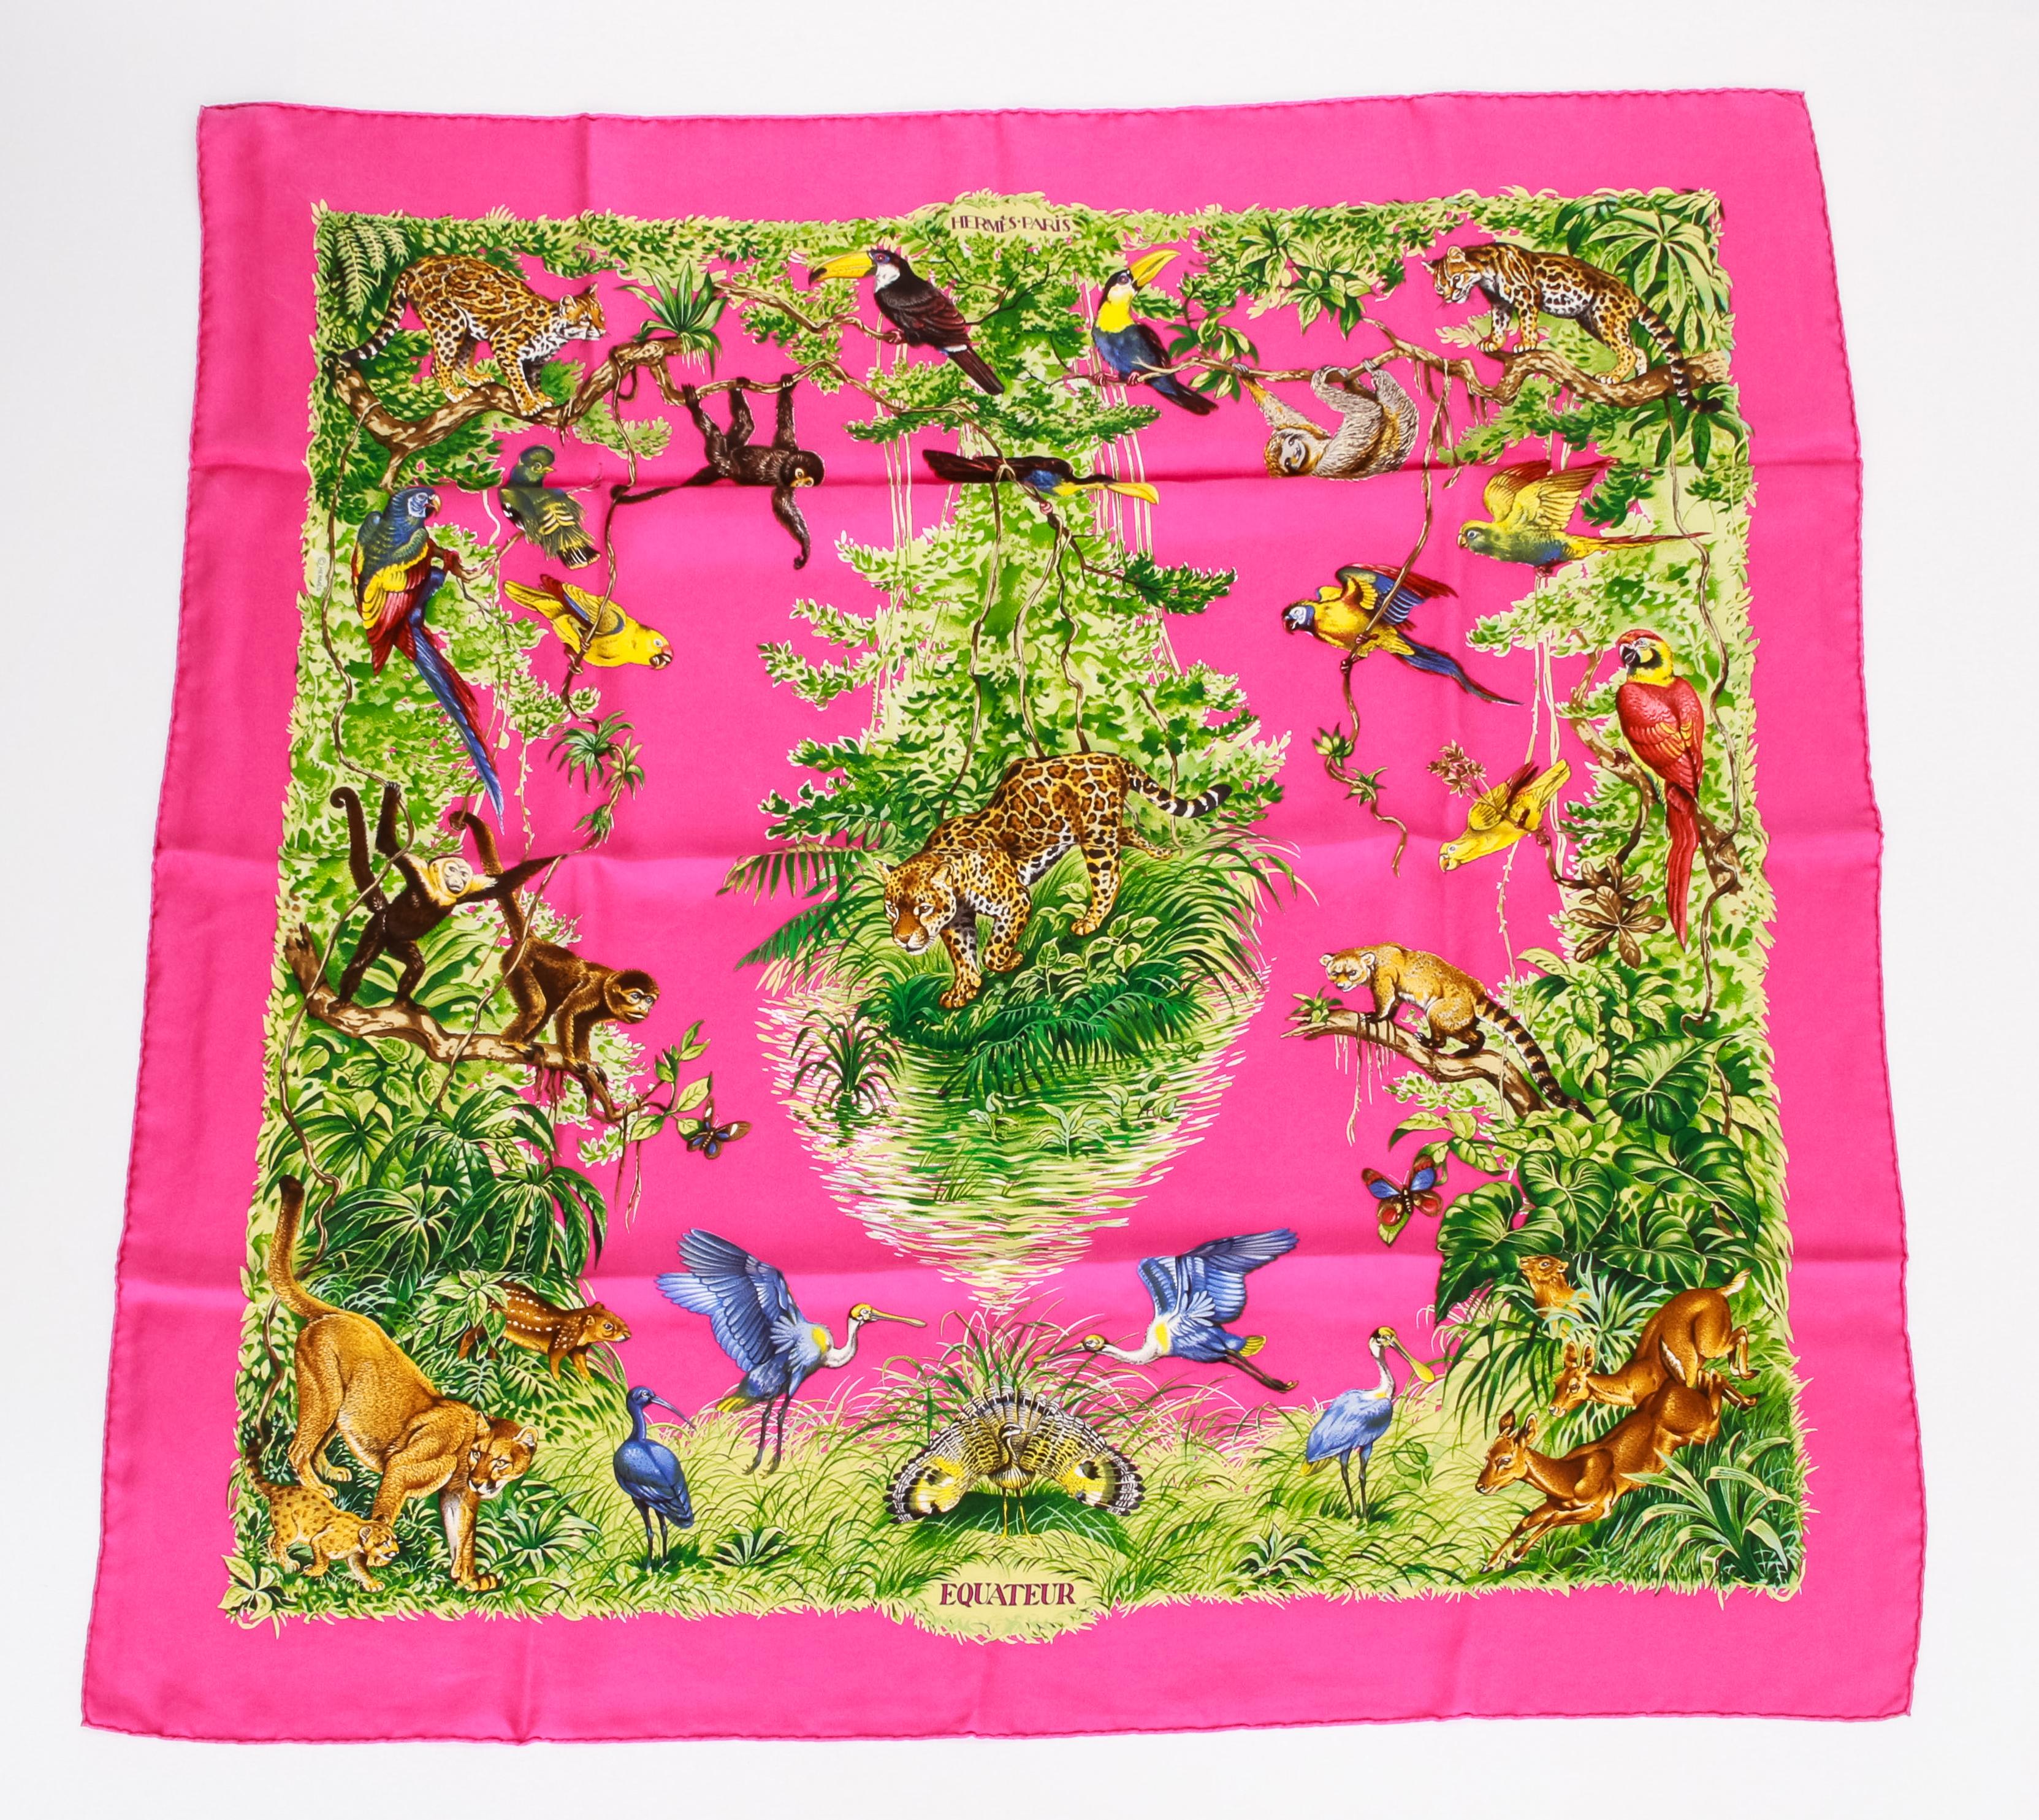 Hermès silk Equateur scarf designed by Robert Dallet. Fuchsia and green colorway with hand-rolled edges. Washed silk. Brand new in original box.